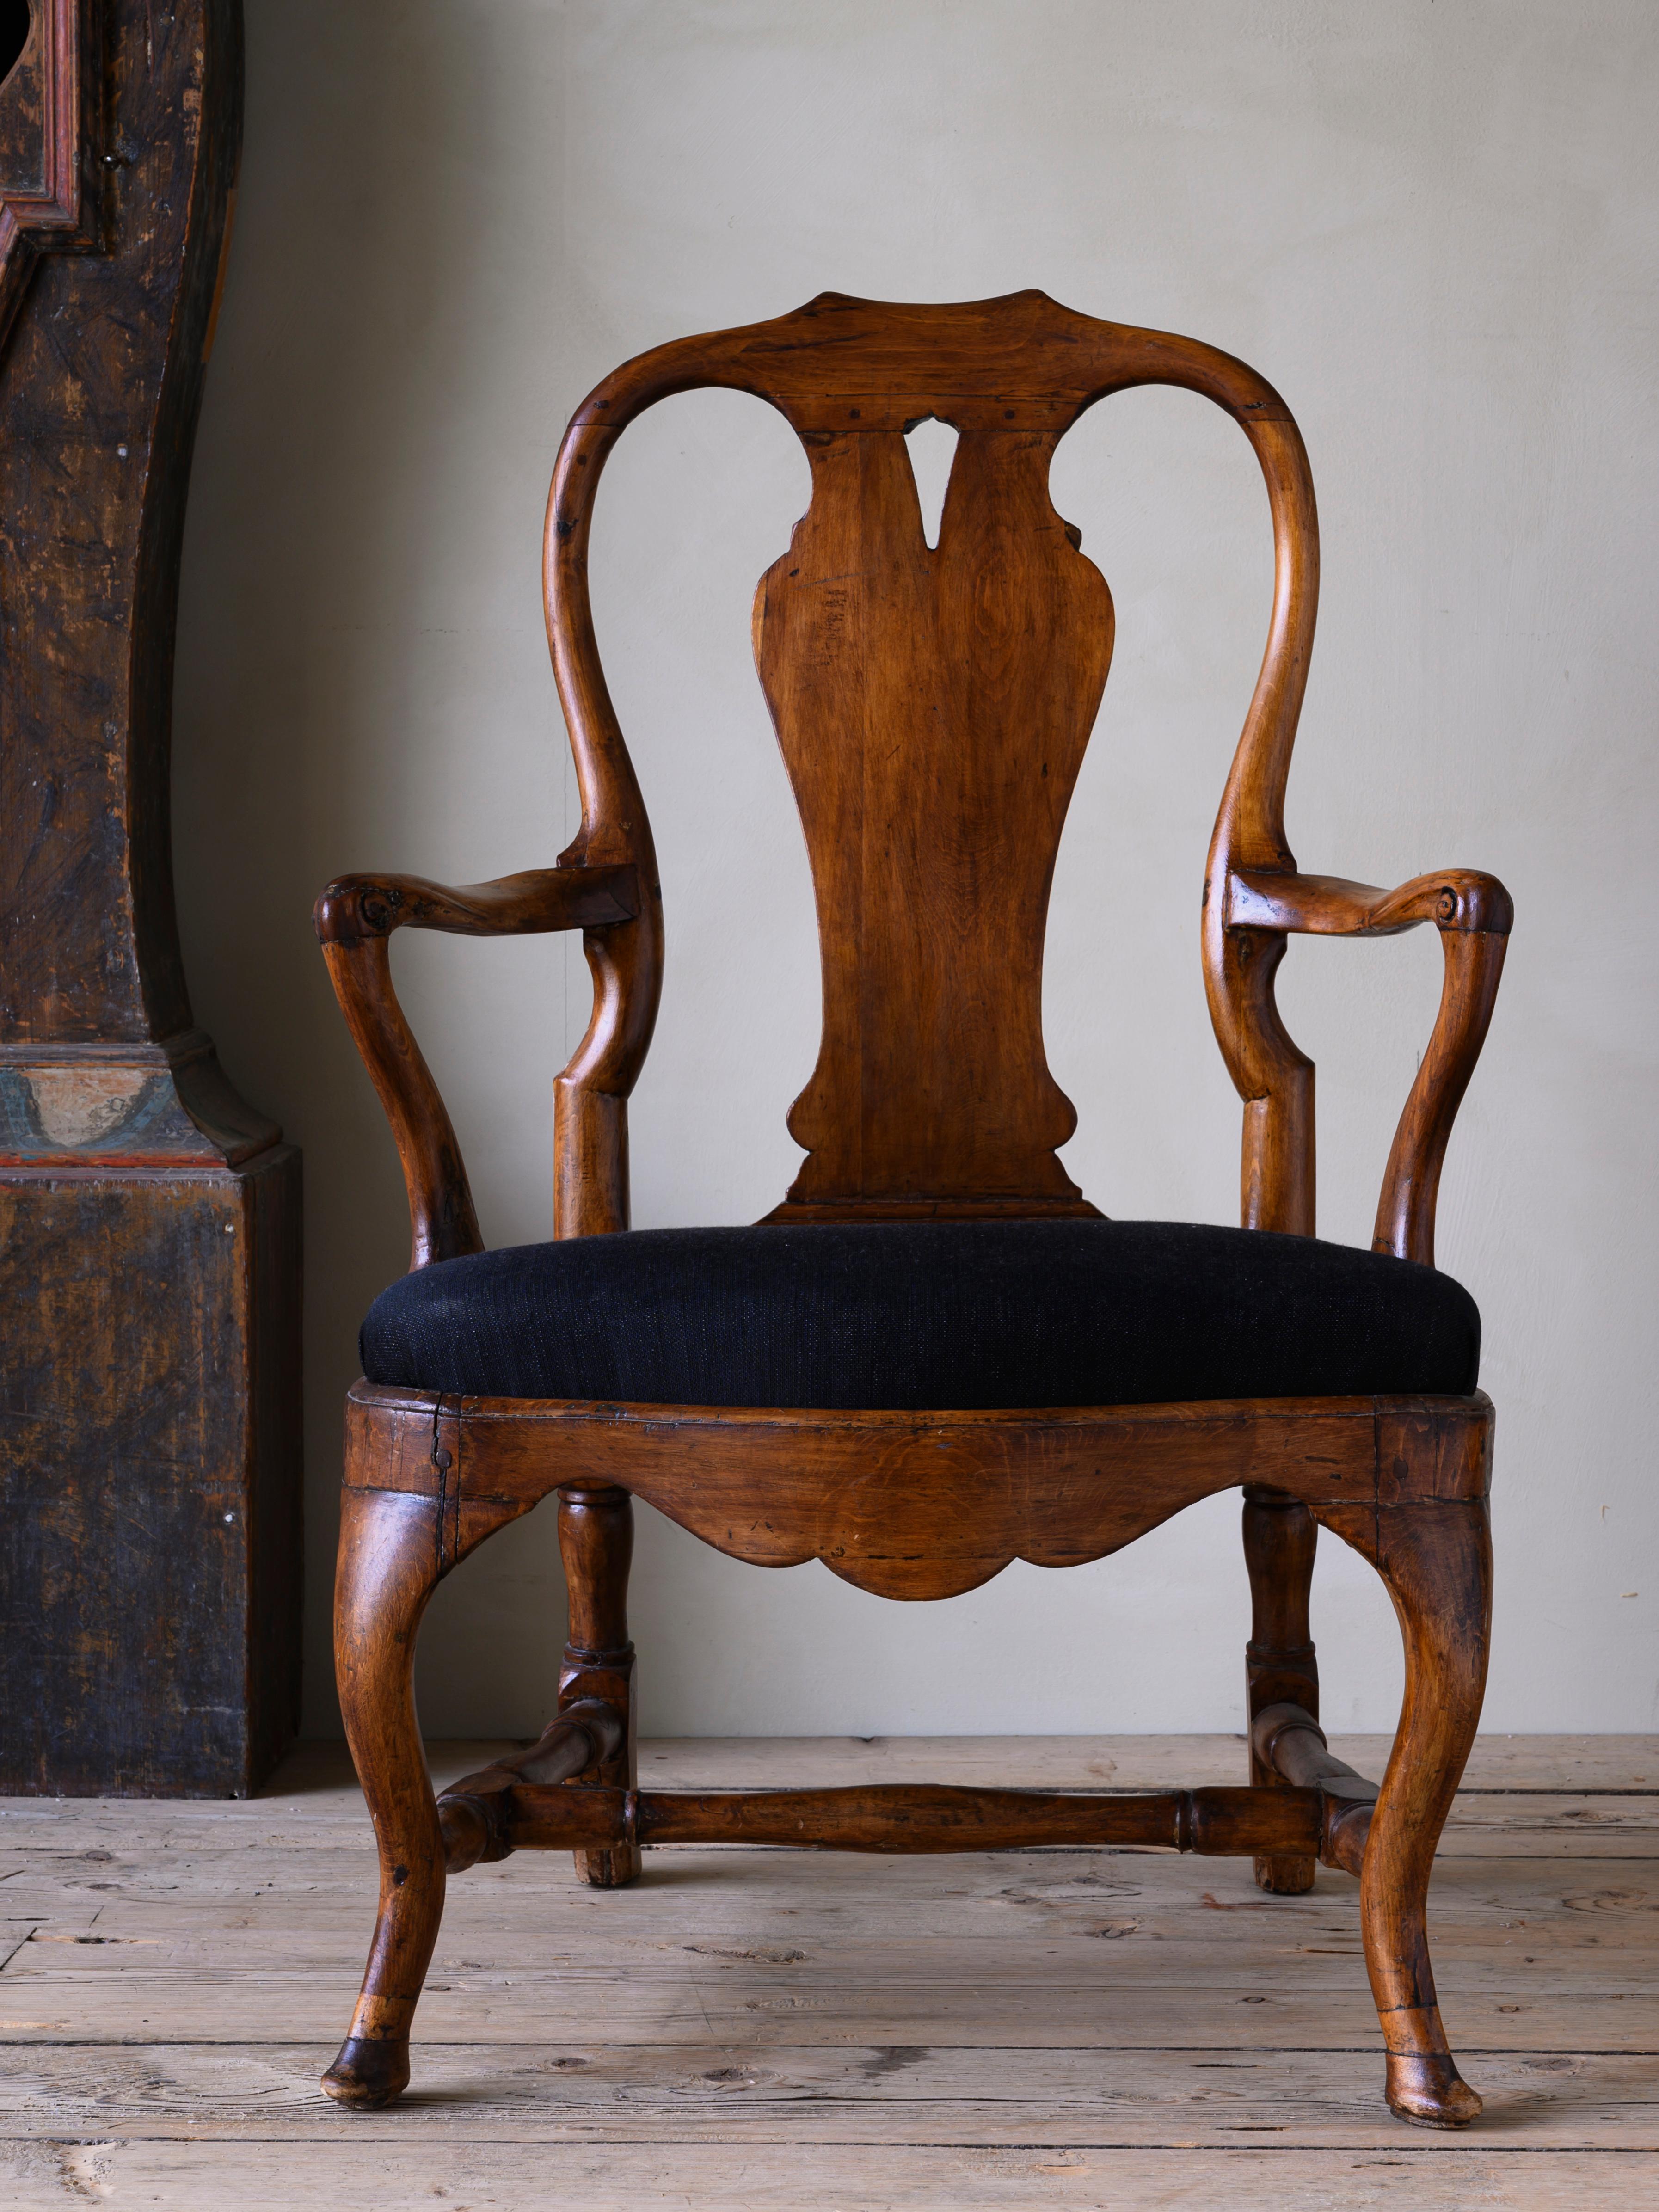 Fine 18th century Swedish Rococo armchair with a nice subtle patina and great proportions, circa 1870, Stockholm.
Simply elegant, no fuss. It's all about the proportions and finish.